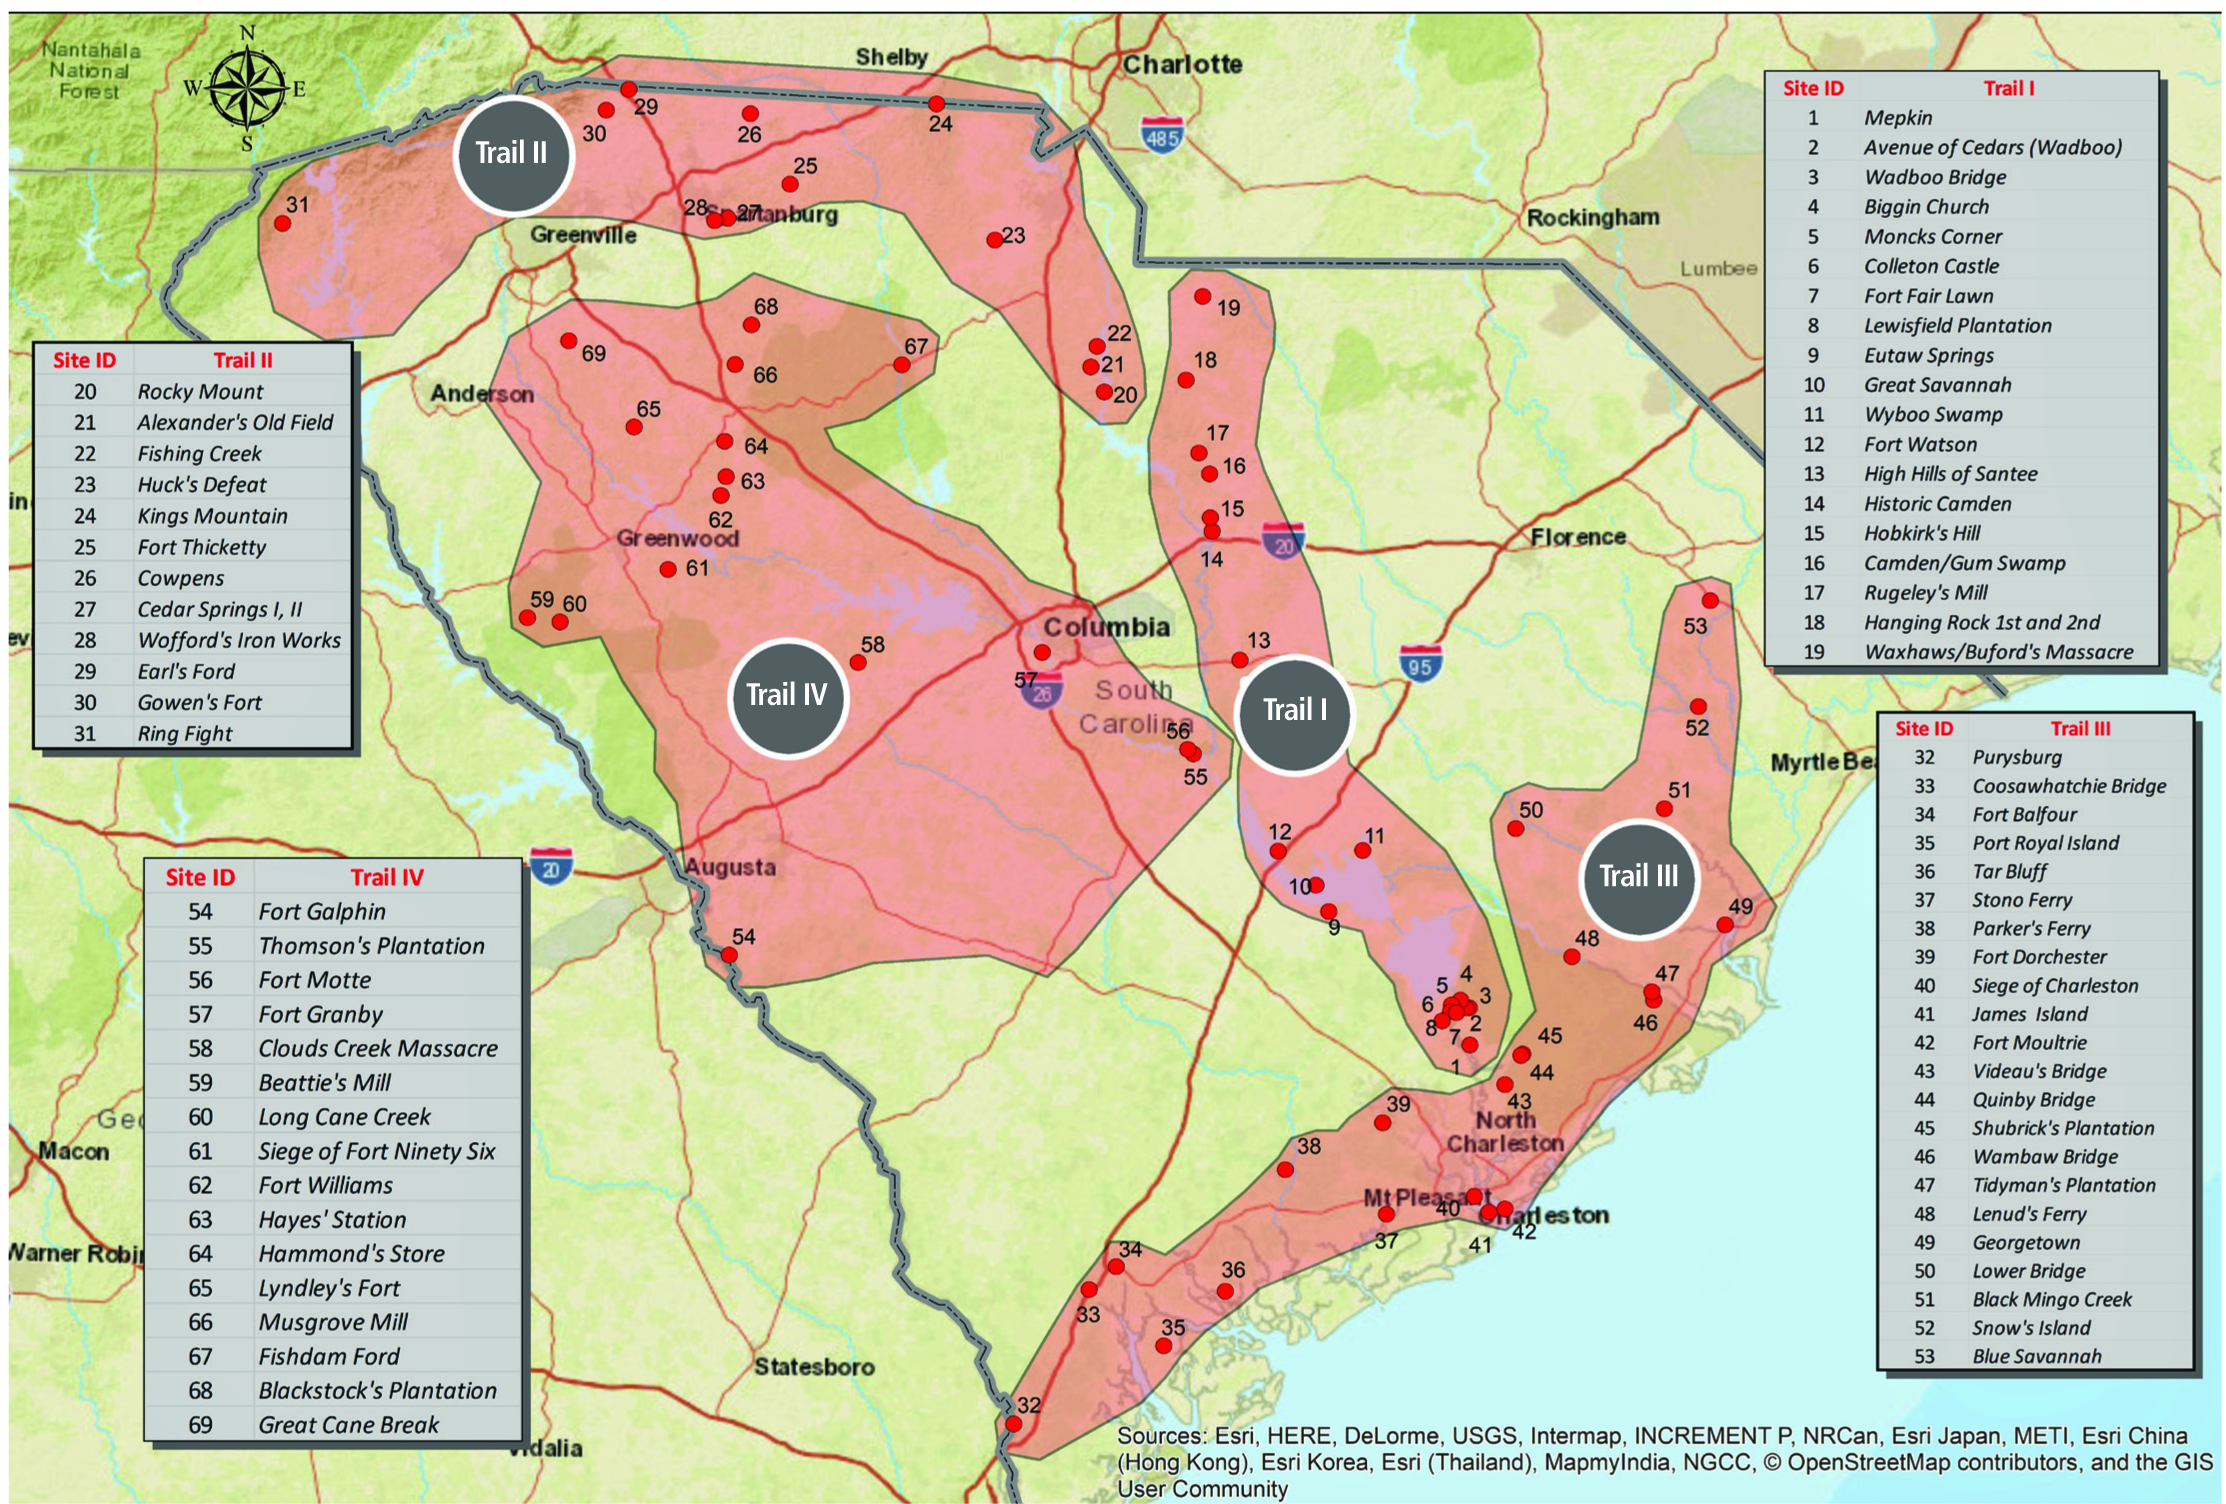 The Liberty Trail map represents the Revolutionary War battle sites in South Carolina that the SC Battleground Trust and the American Battlefield Trust aspire to preserve, interpret, and open to the public. Some of the sites are preserved by the National Park Service and the State of South Carolina.